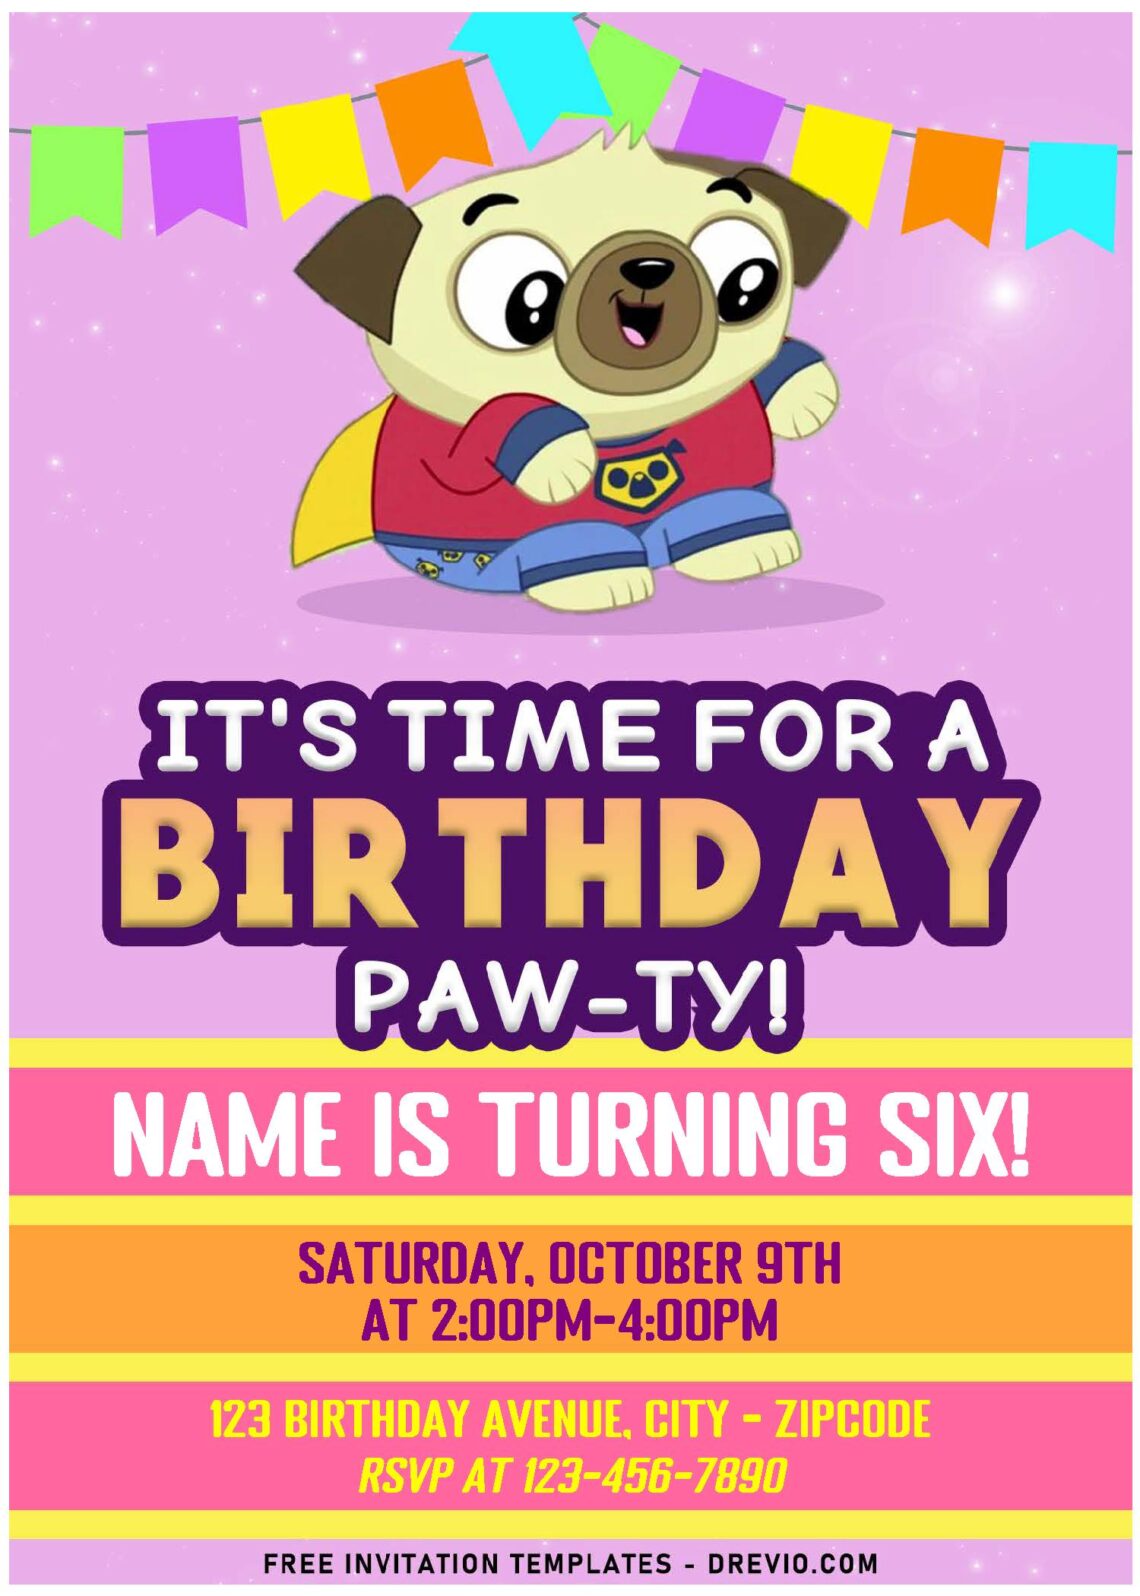 (Free Editable PDF) Lovable Pug Chip And Potato Birthday Invitation Templates with adorable pink background